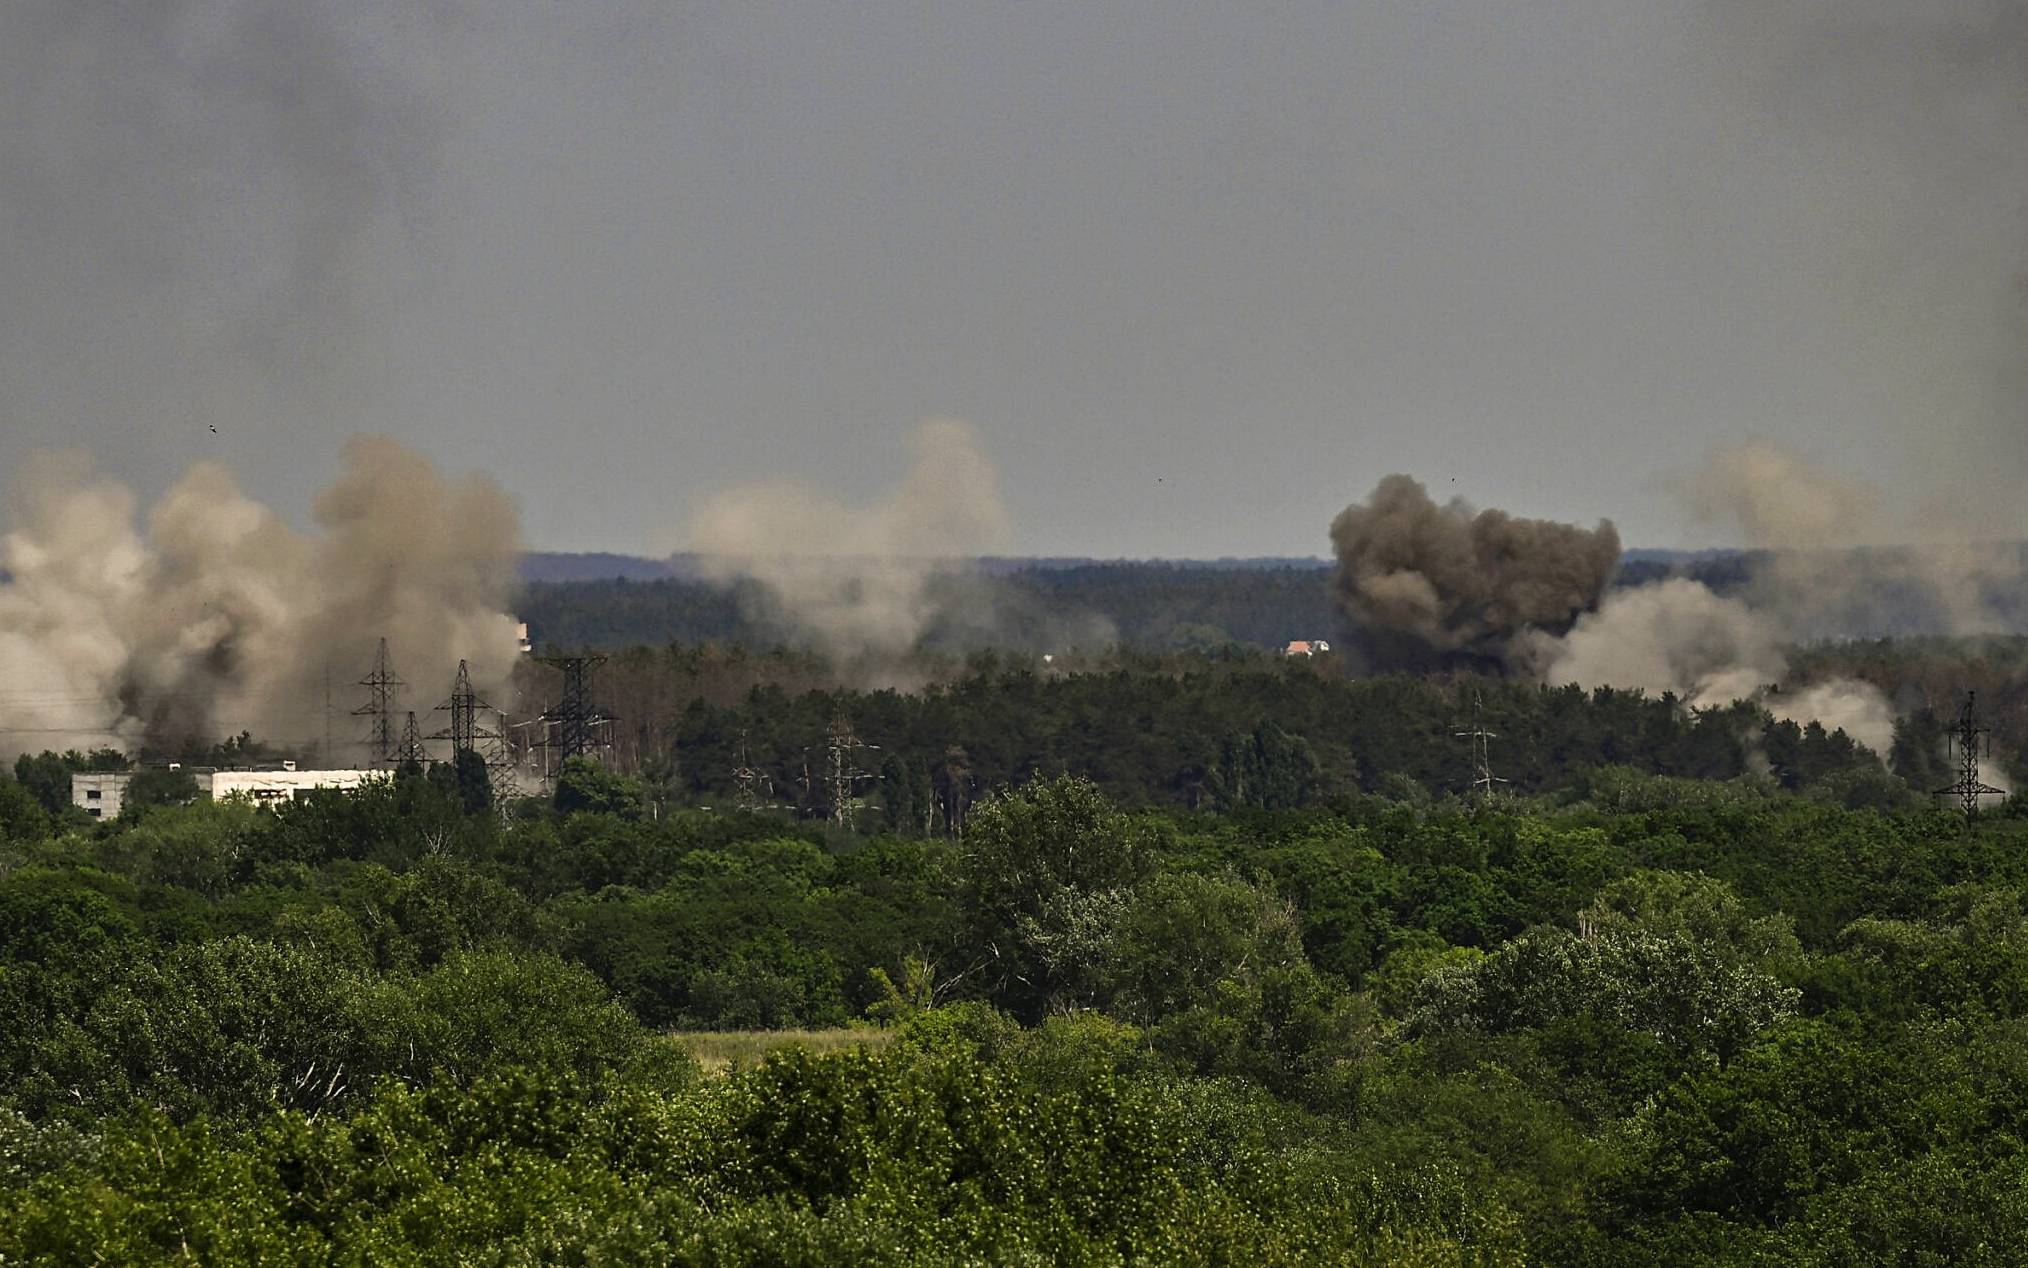 Smoke and dirt rise in the city of Severodonetsk during heavy fightings between Ukrainian and Russian troops at eastern Ukrainian region of Donbas on May 30, 2022, on the 96th day of the Russian invasion of Ukraine. - EU leaders will try to overcome Hungary's rejection of a Russian oil embargo on May 30, 2022 as part of a further tightening of sanctions against Moscow, whose forces are advancing in eastern Ukraine, with fighting in the heart of the key city of Severodonetsk. (Photo by ARIS MESSINIS / AFP)